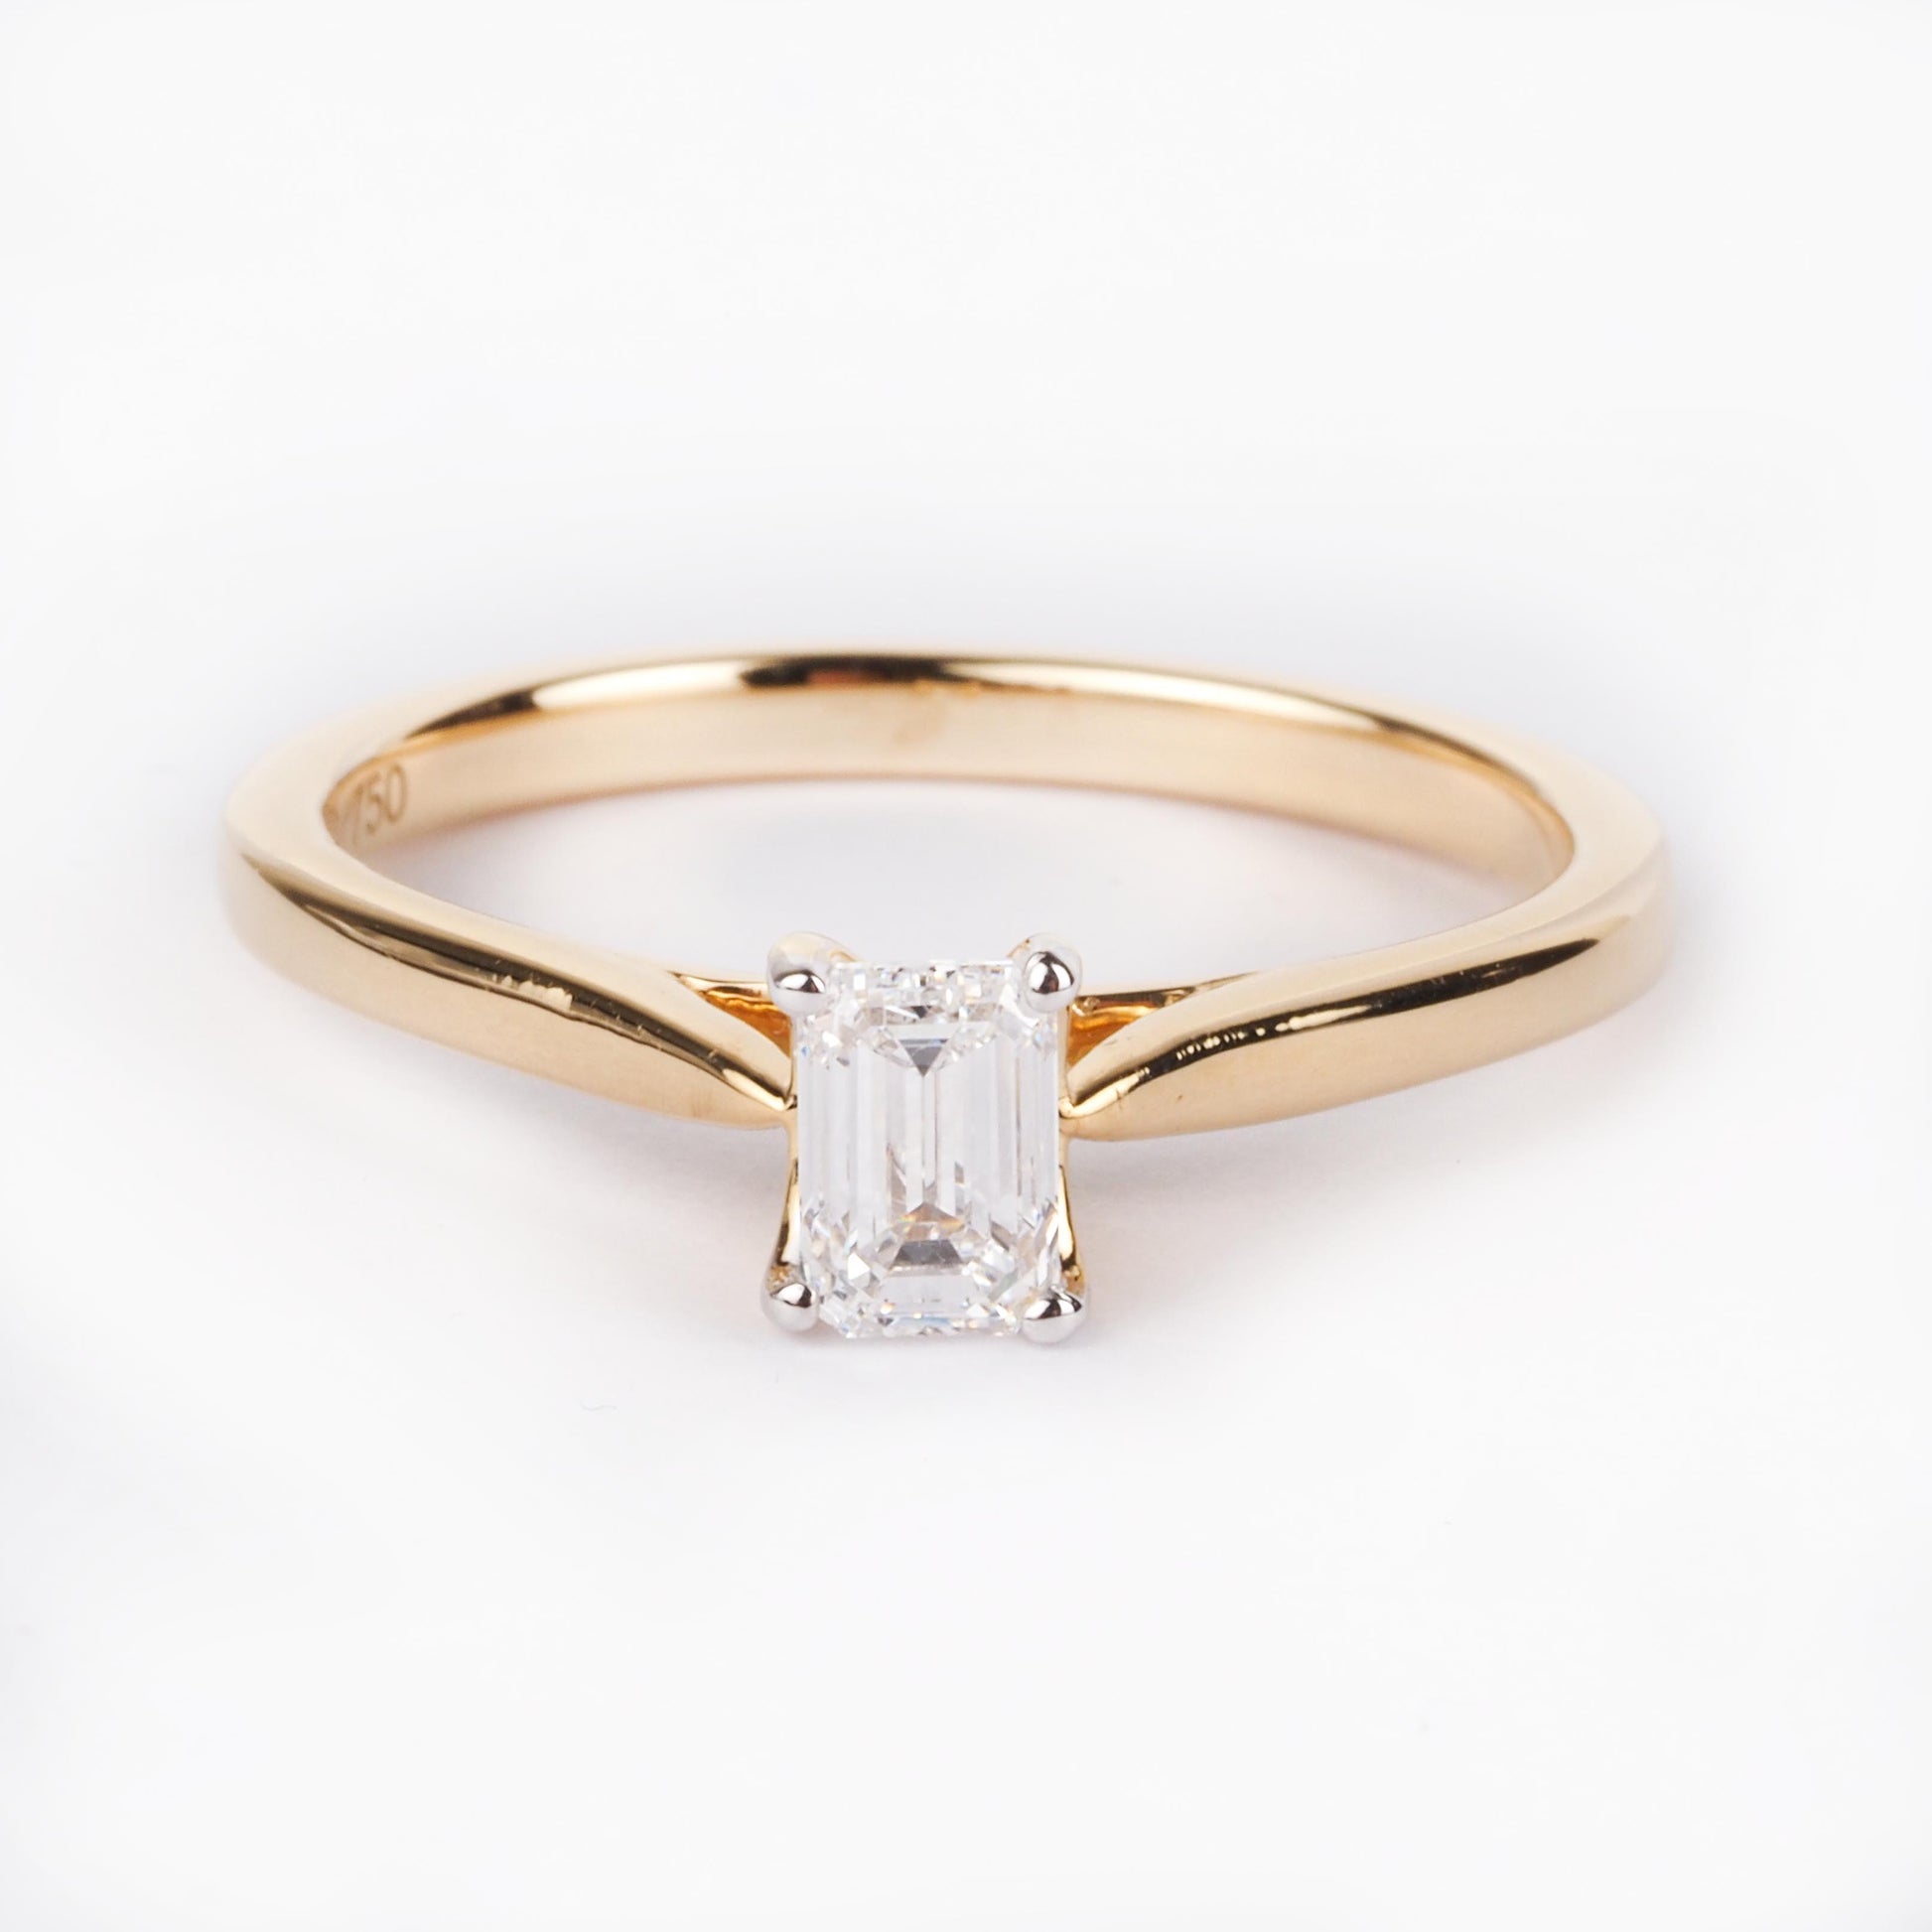 18ct Yellow Gold Solitaire Diamond Ring LR-7338 - Minar Jewellers